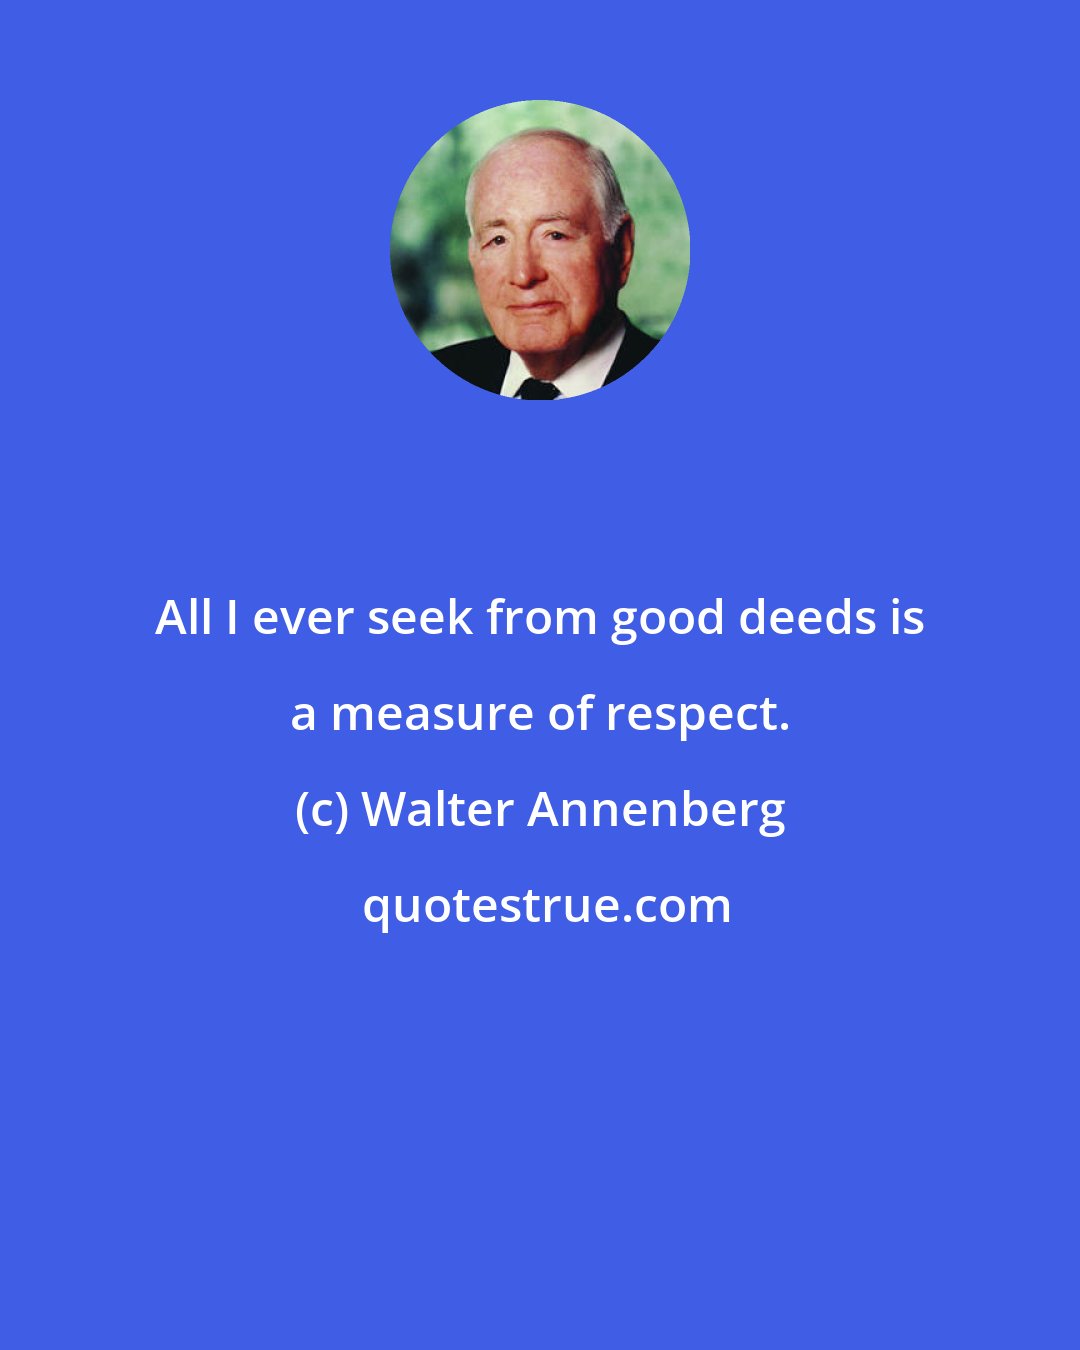 Walter Annenberg: All I ever seek from good deeds is a measure of respect.